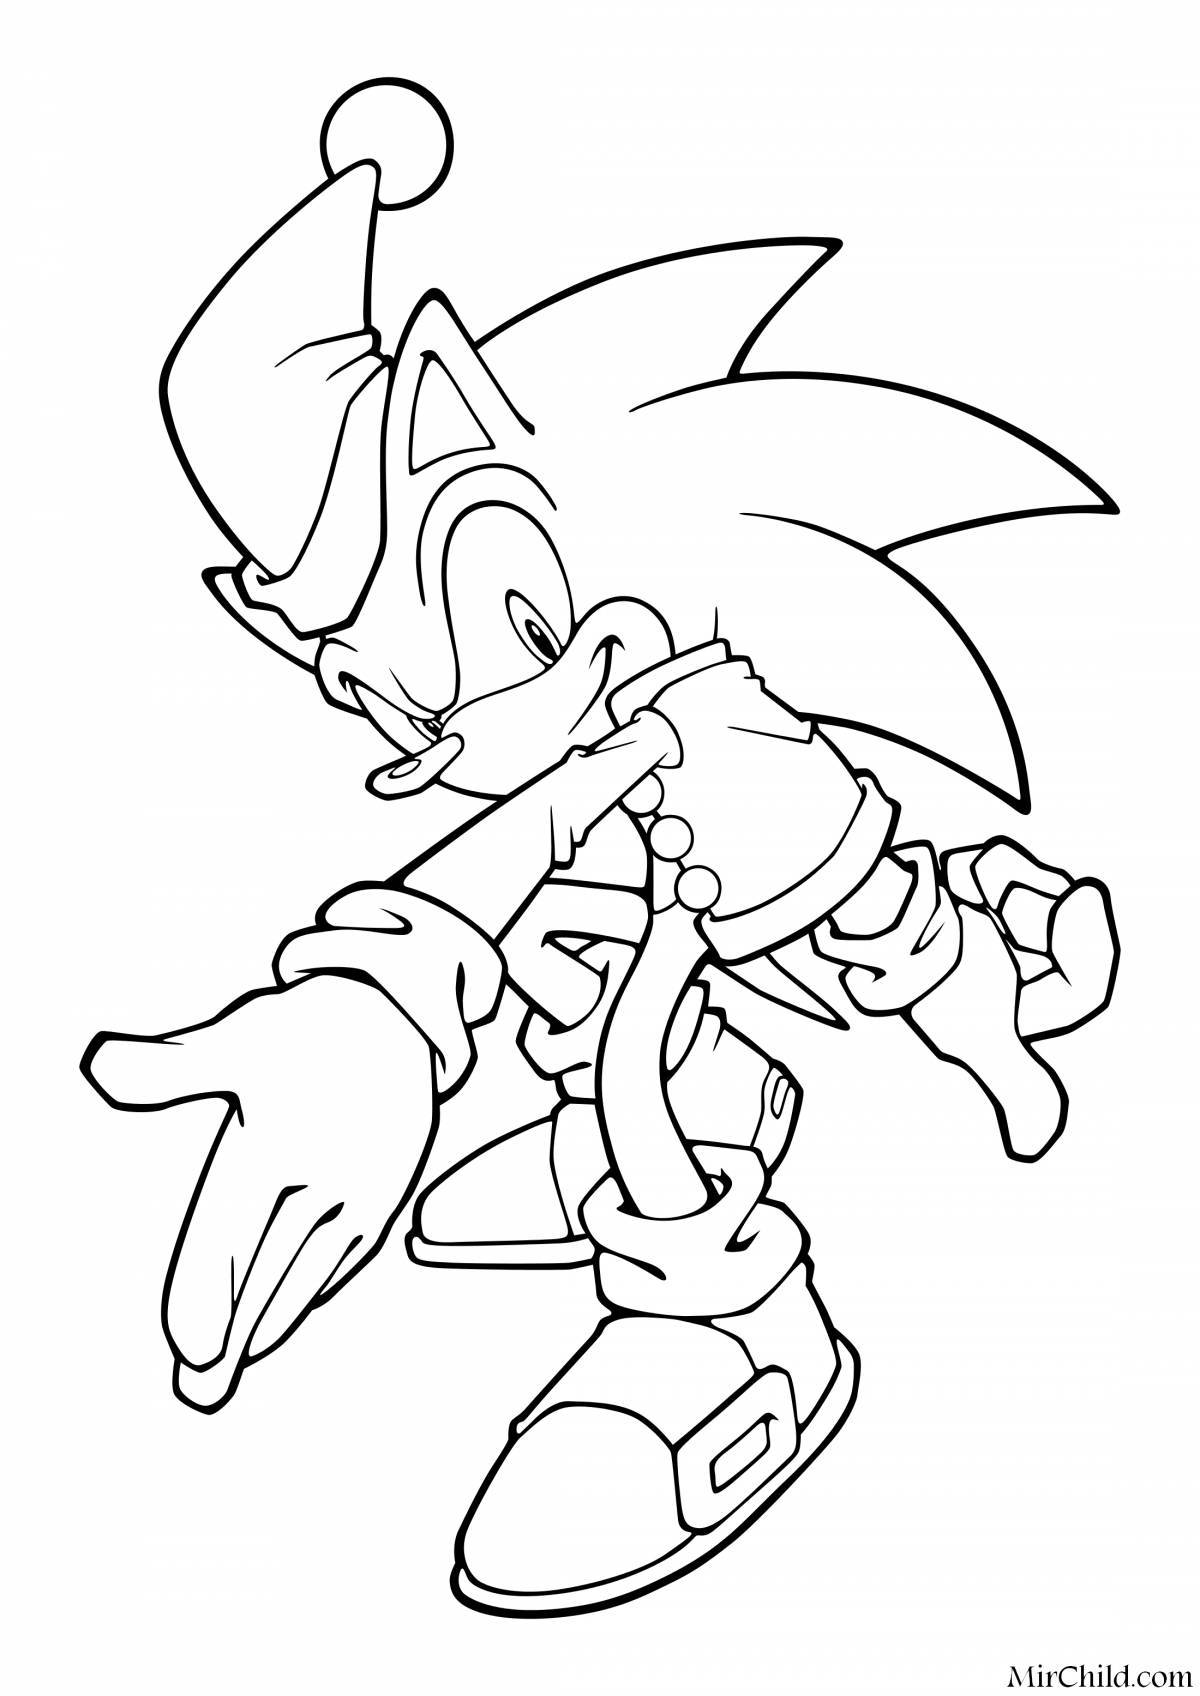 Fancy sonic coloring book for kids